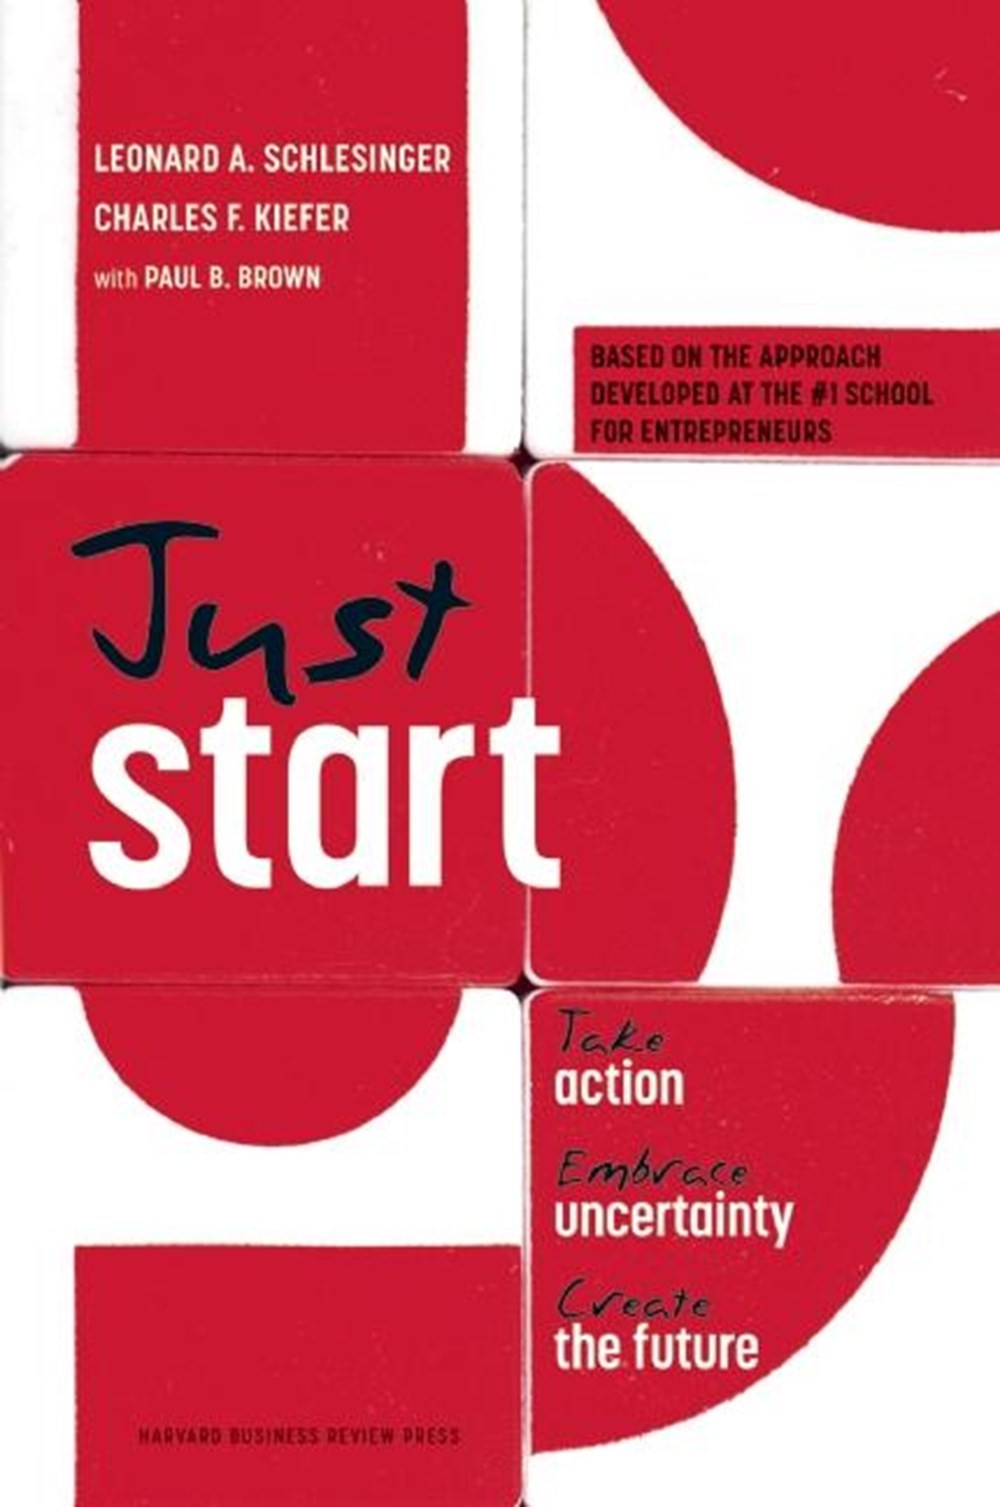 Just Start Take Action, Embrace Uncertainty, Create the Future